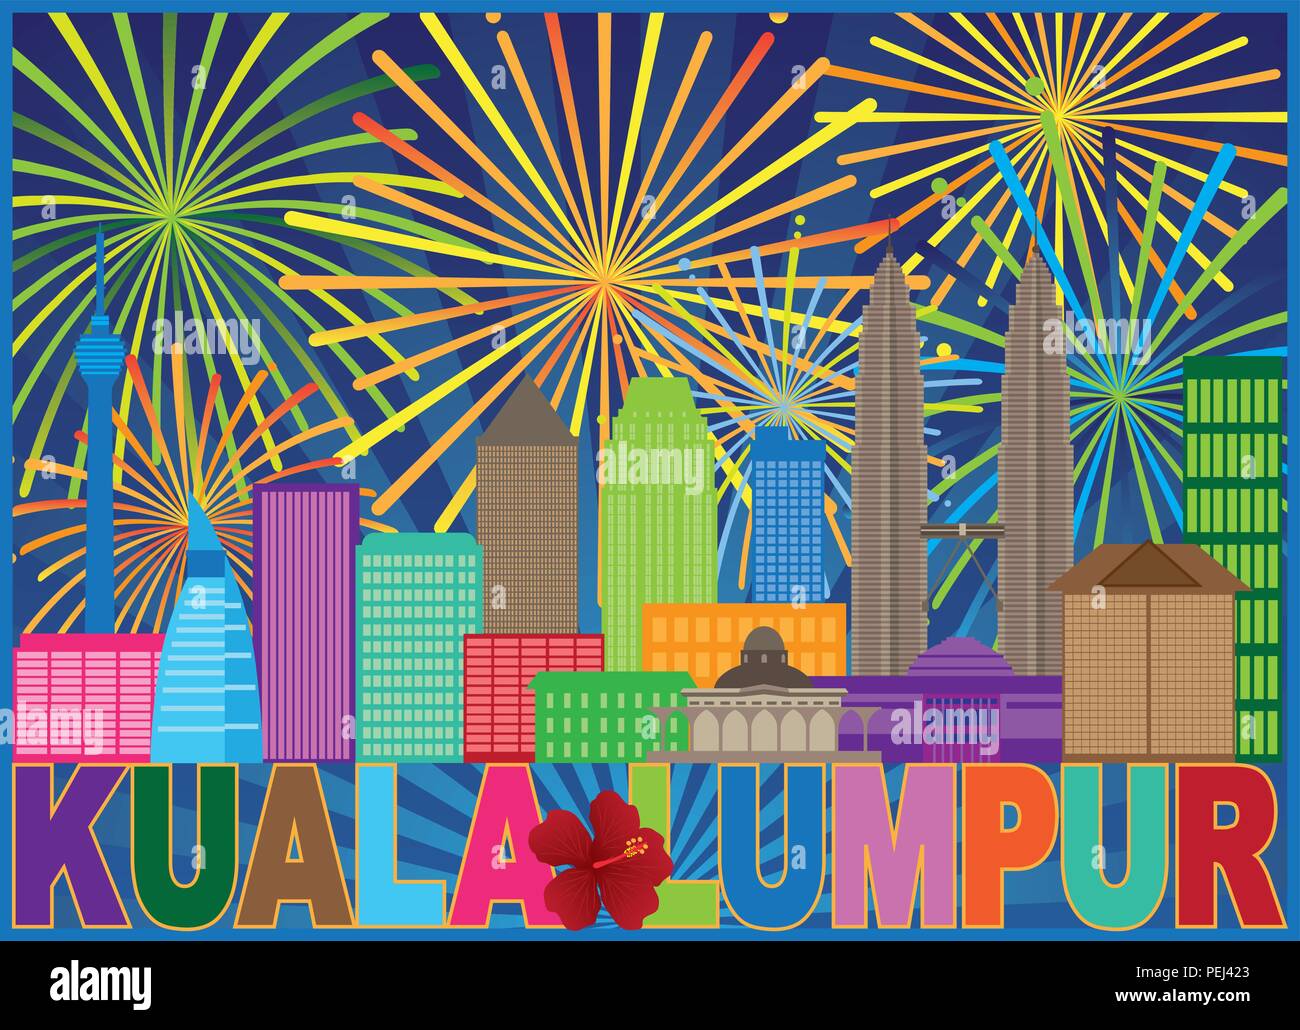 Kuala Lumpur Malaysia City Skyline Color Text State Flower Hisbicus Fireworks Display Background Illustration Stock Vector